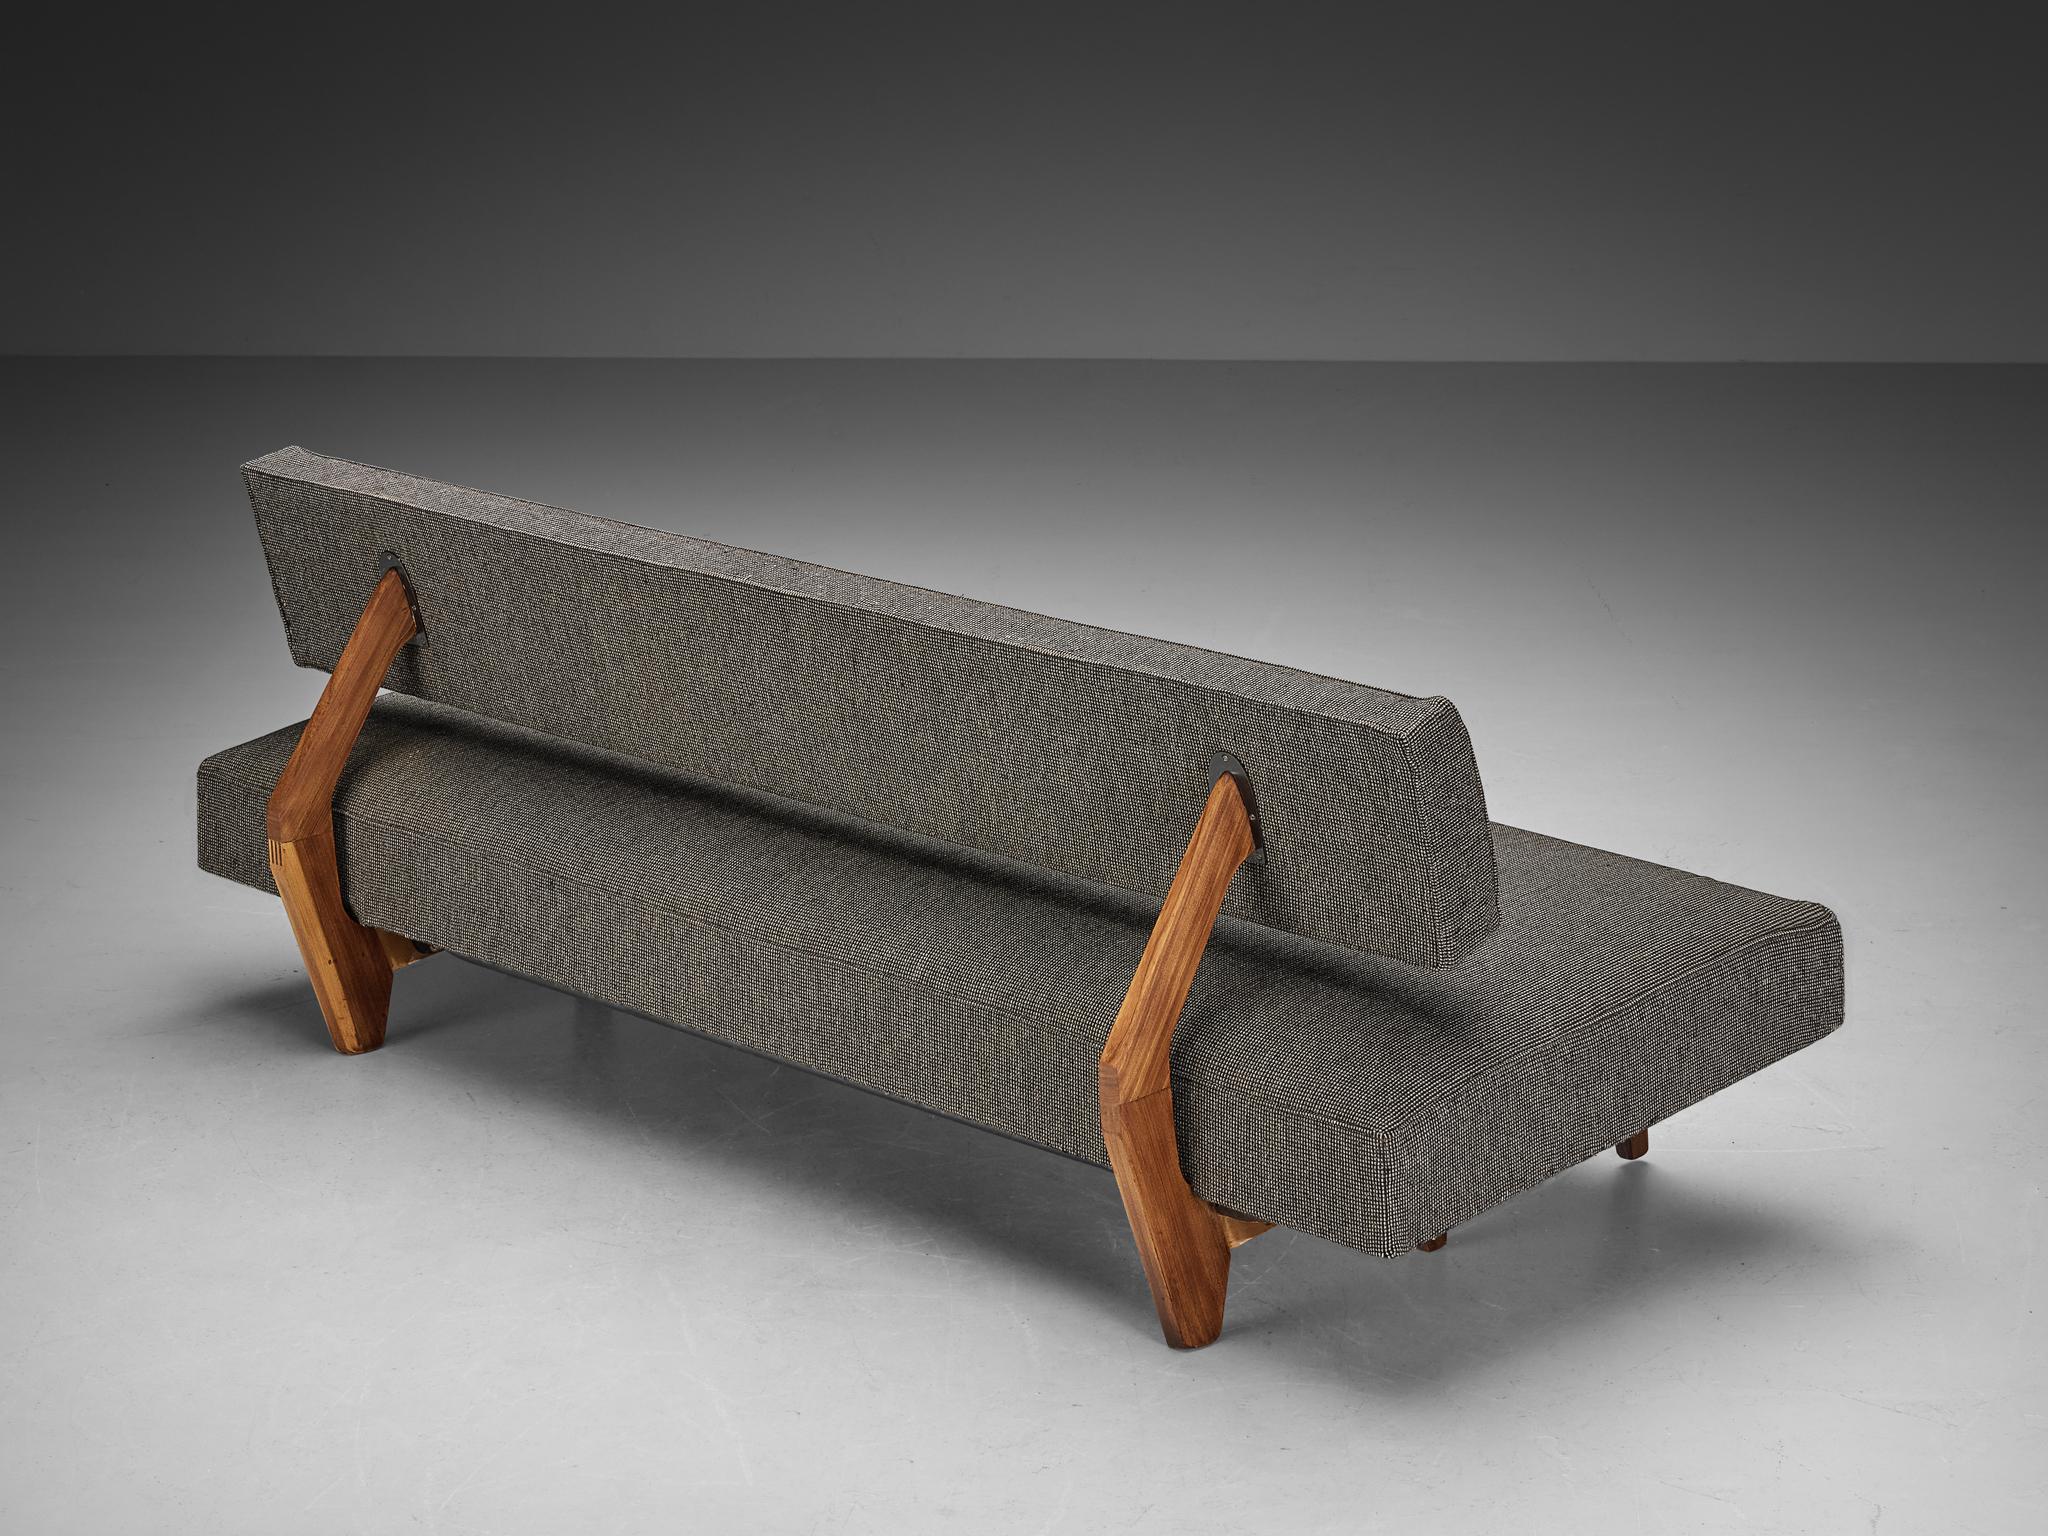 Franz Hohn for Honeta, daybed or sofa, model FH 10, fabric, teak, beech, metal, Germany, 1959

Made in 1959, this sofa known as FH10 is created by Franz Hohn for Honeta. Geometry is at the forefront of this piece, expressed through its juxtaposition